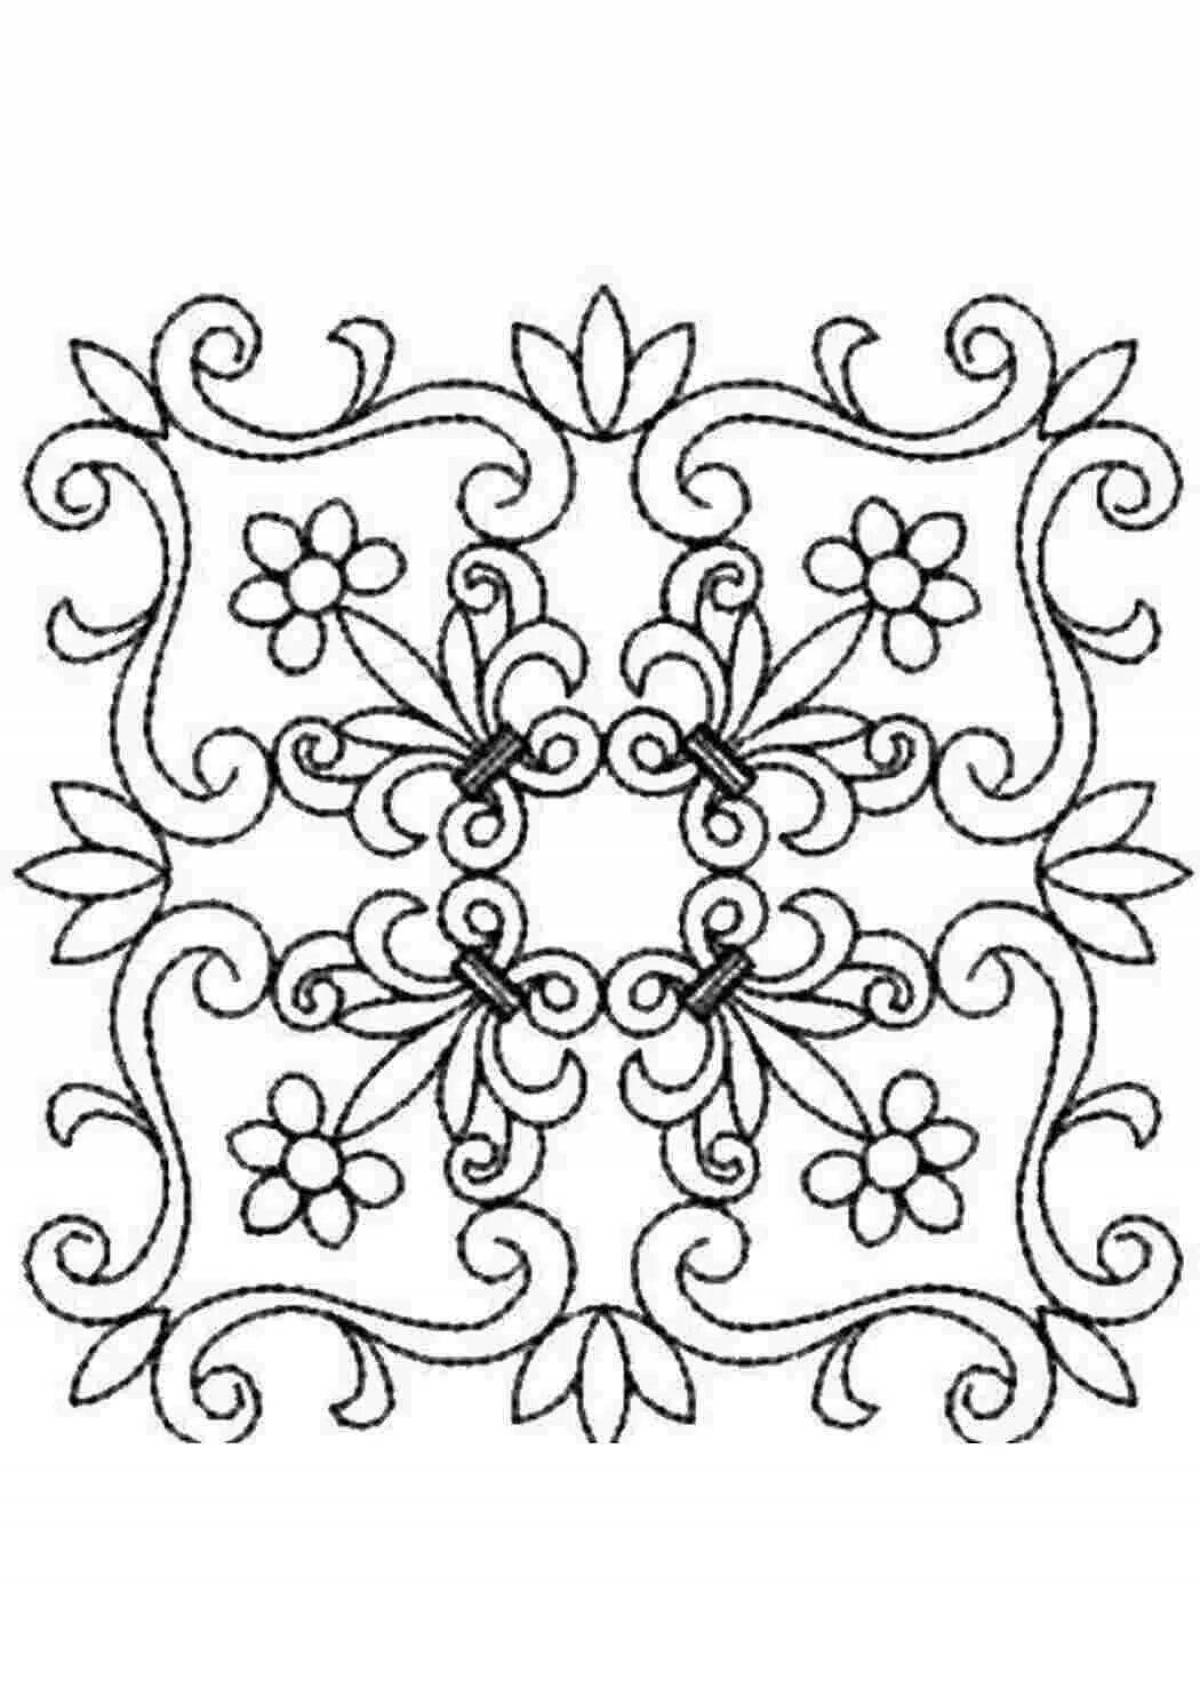 Coloring page happy scarf for kids